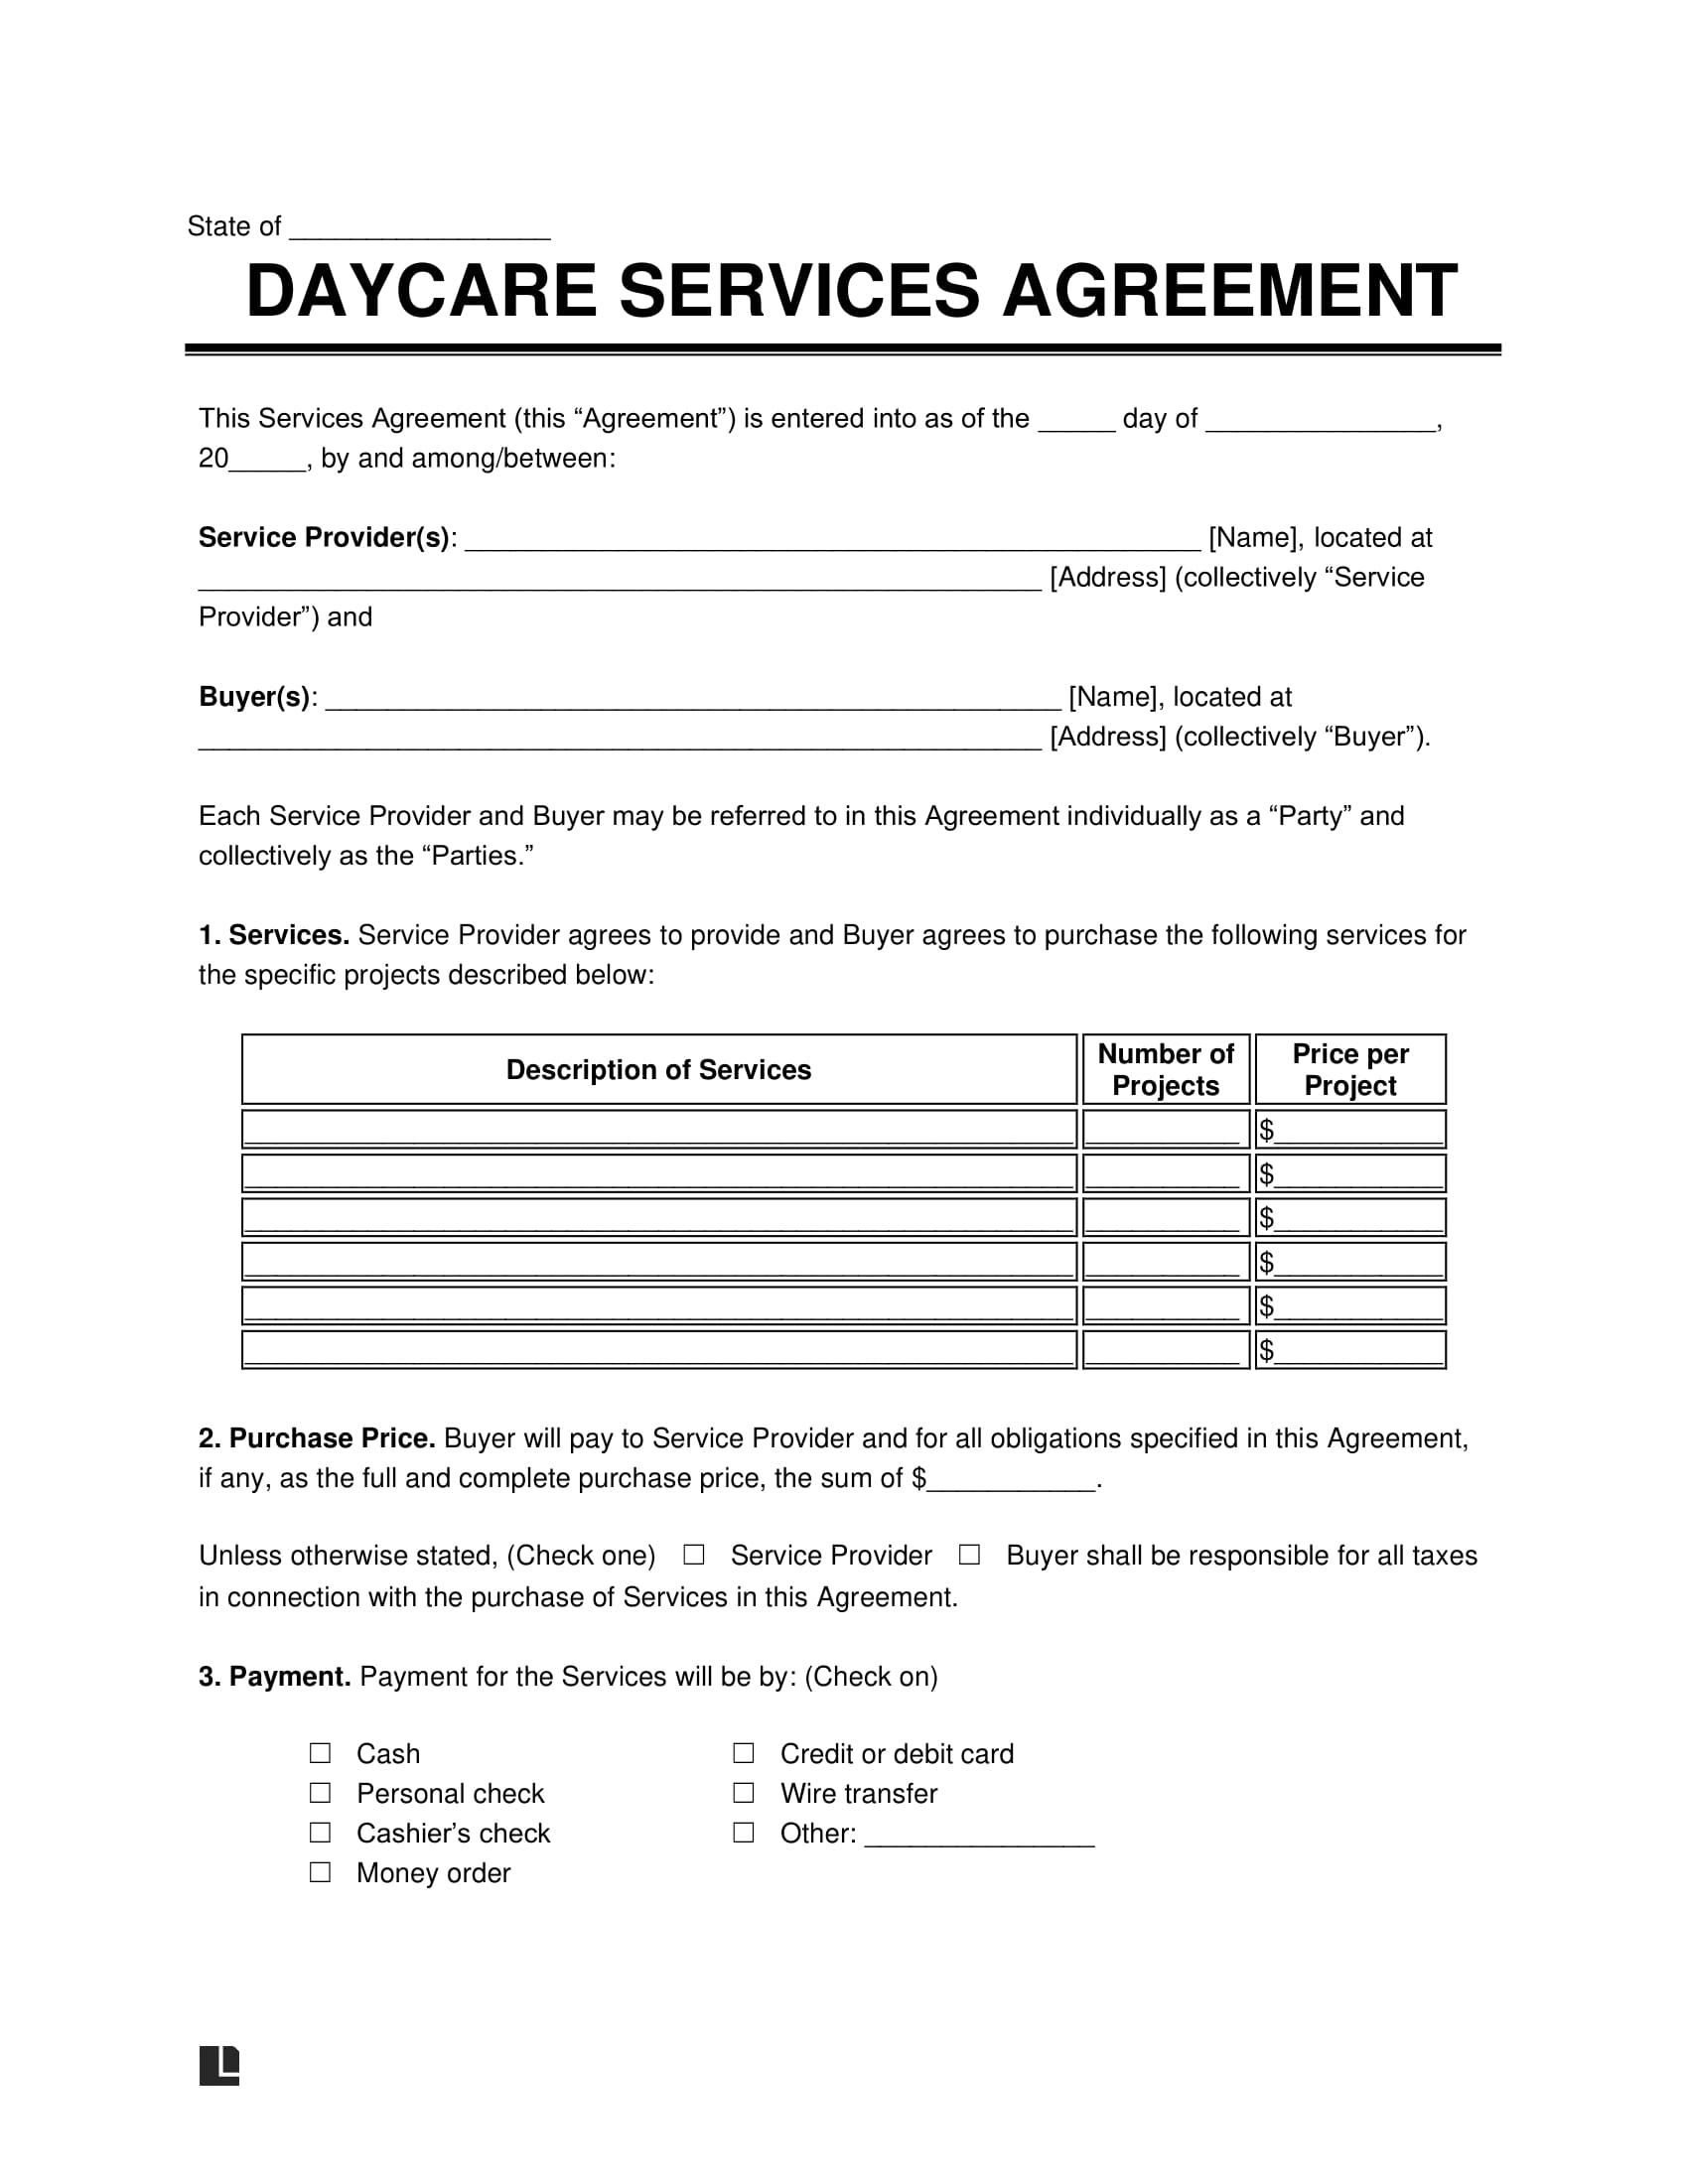 Daycare contract screenshot